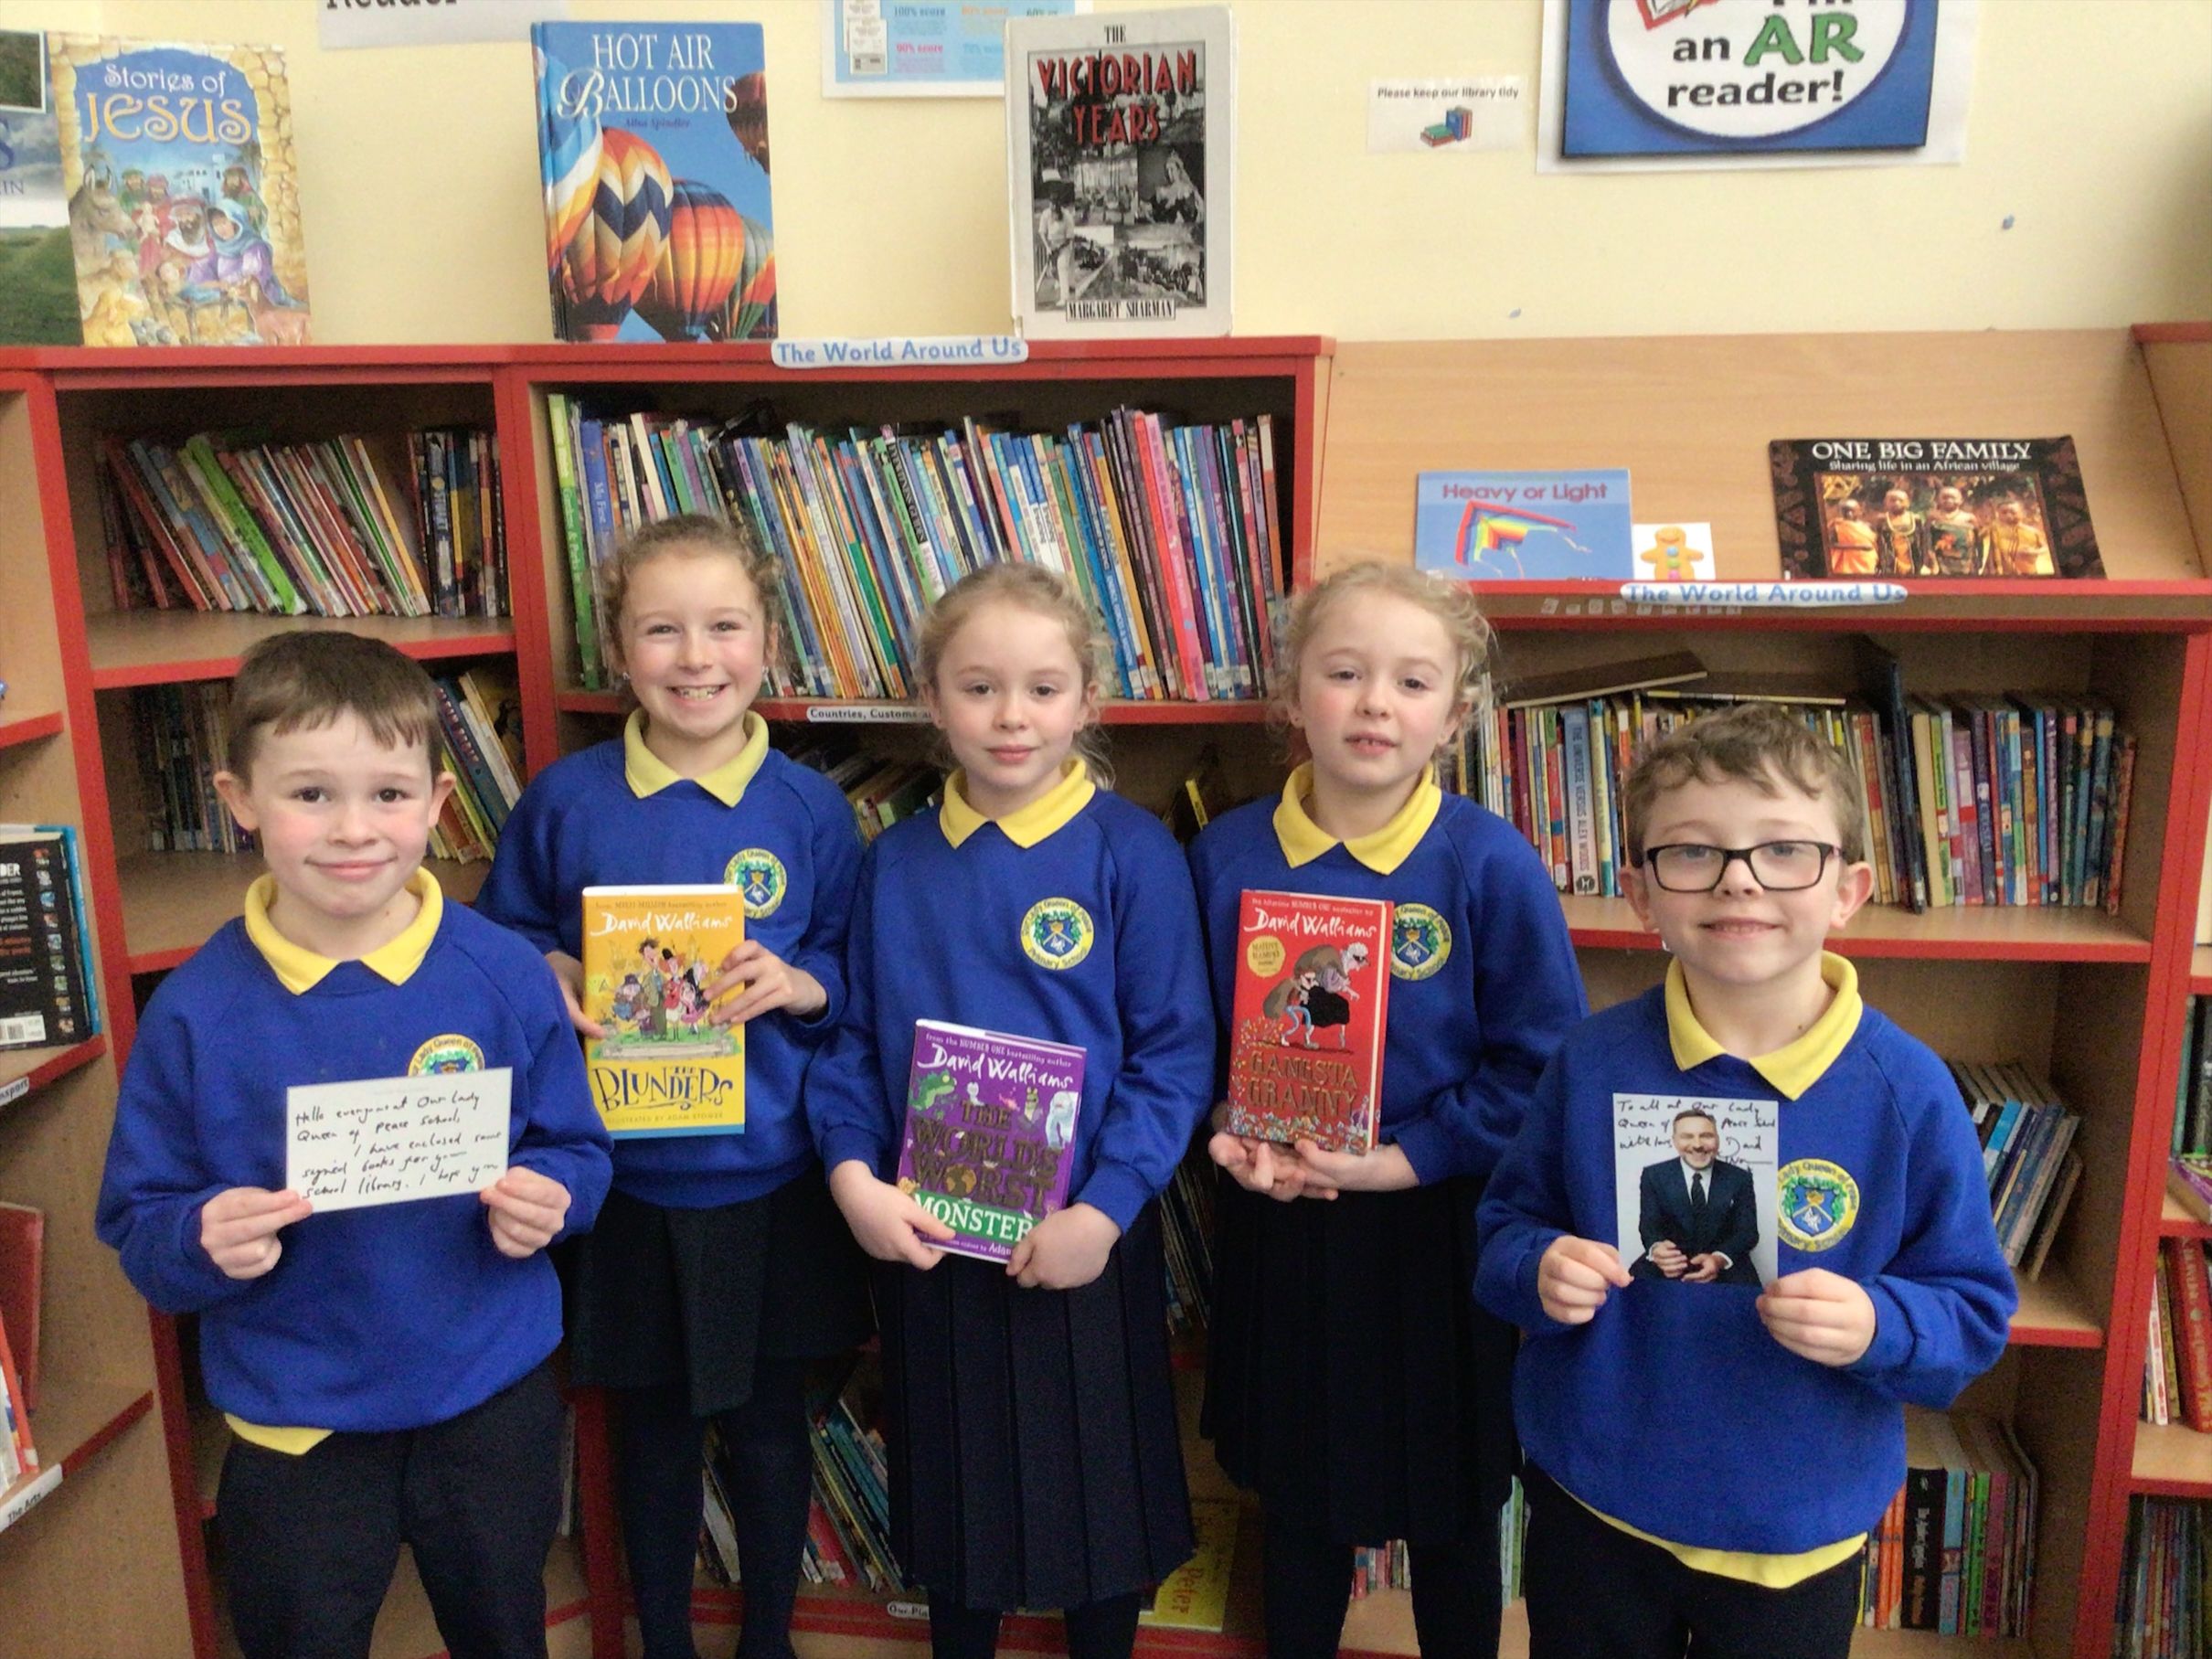 DELIGHTED: P4 pupils from Our Lady Queen of Peace PS with some of David Walliams\' books